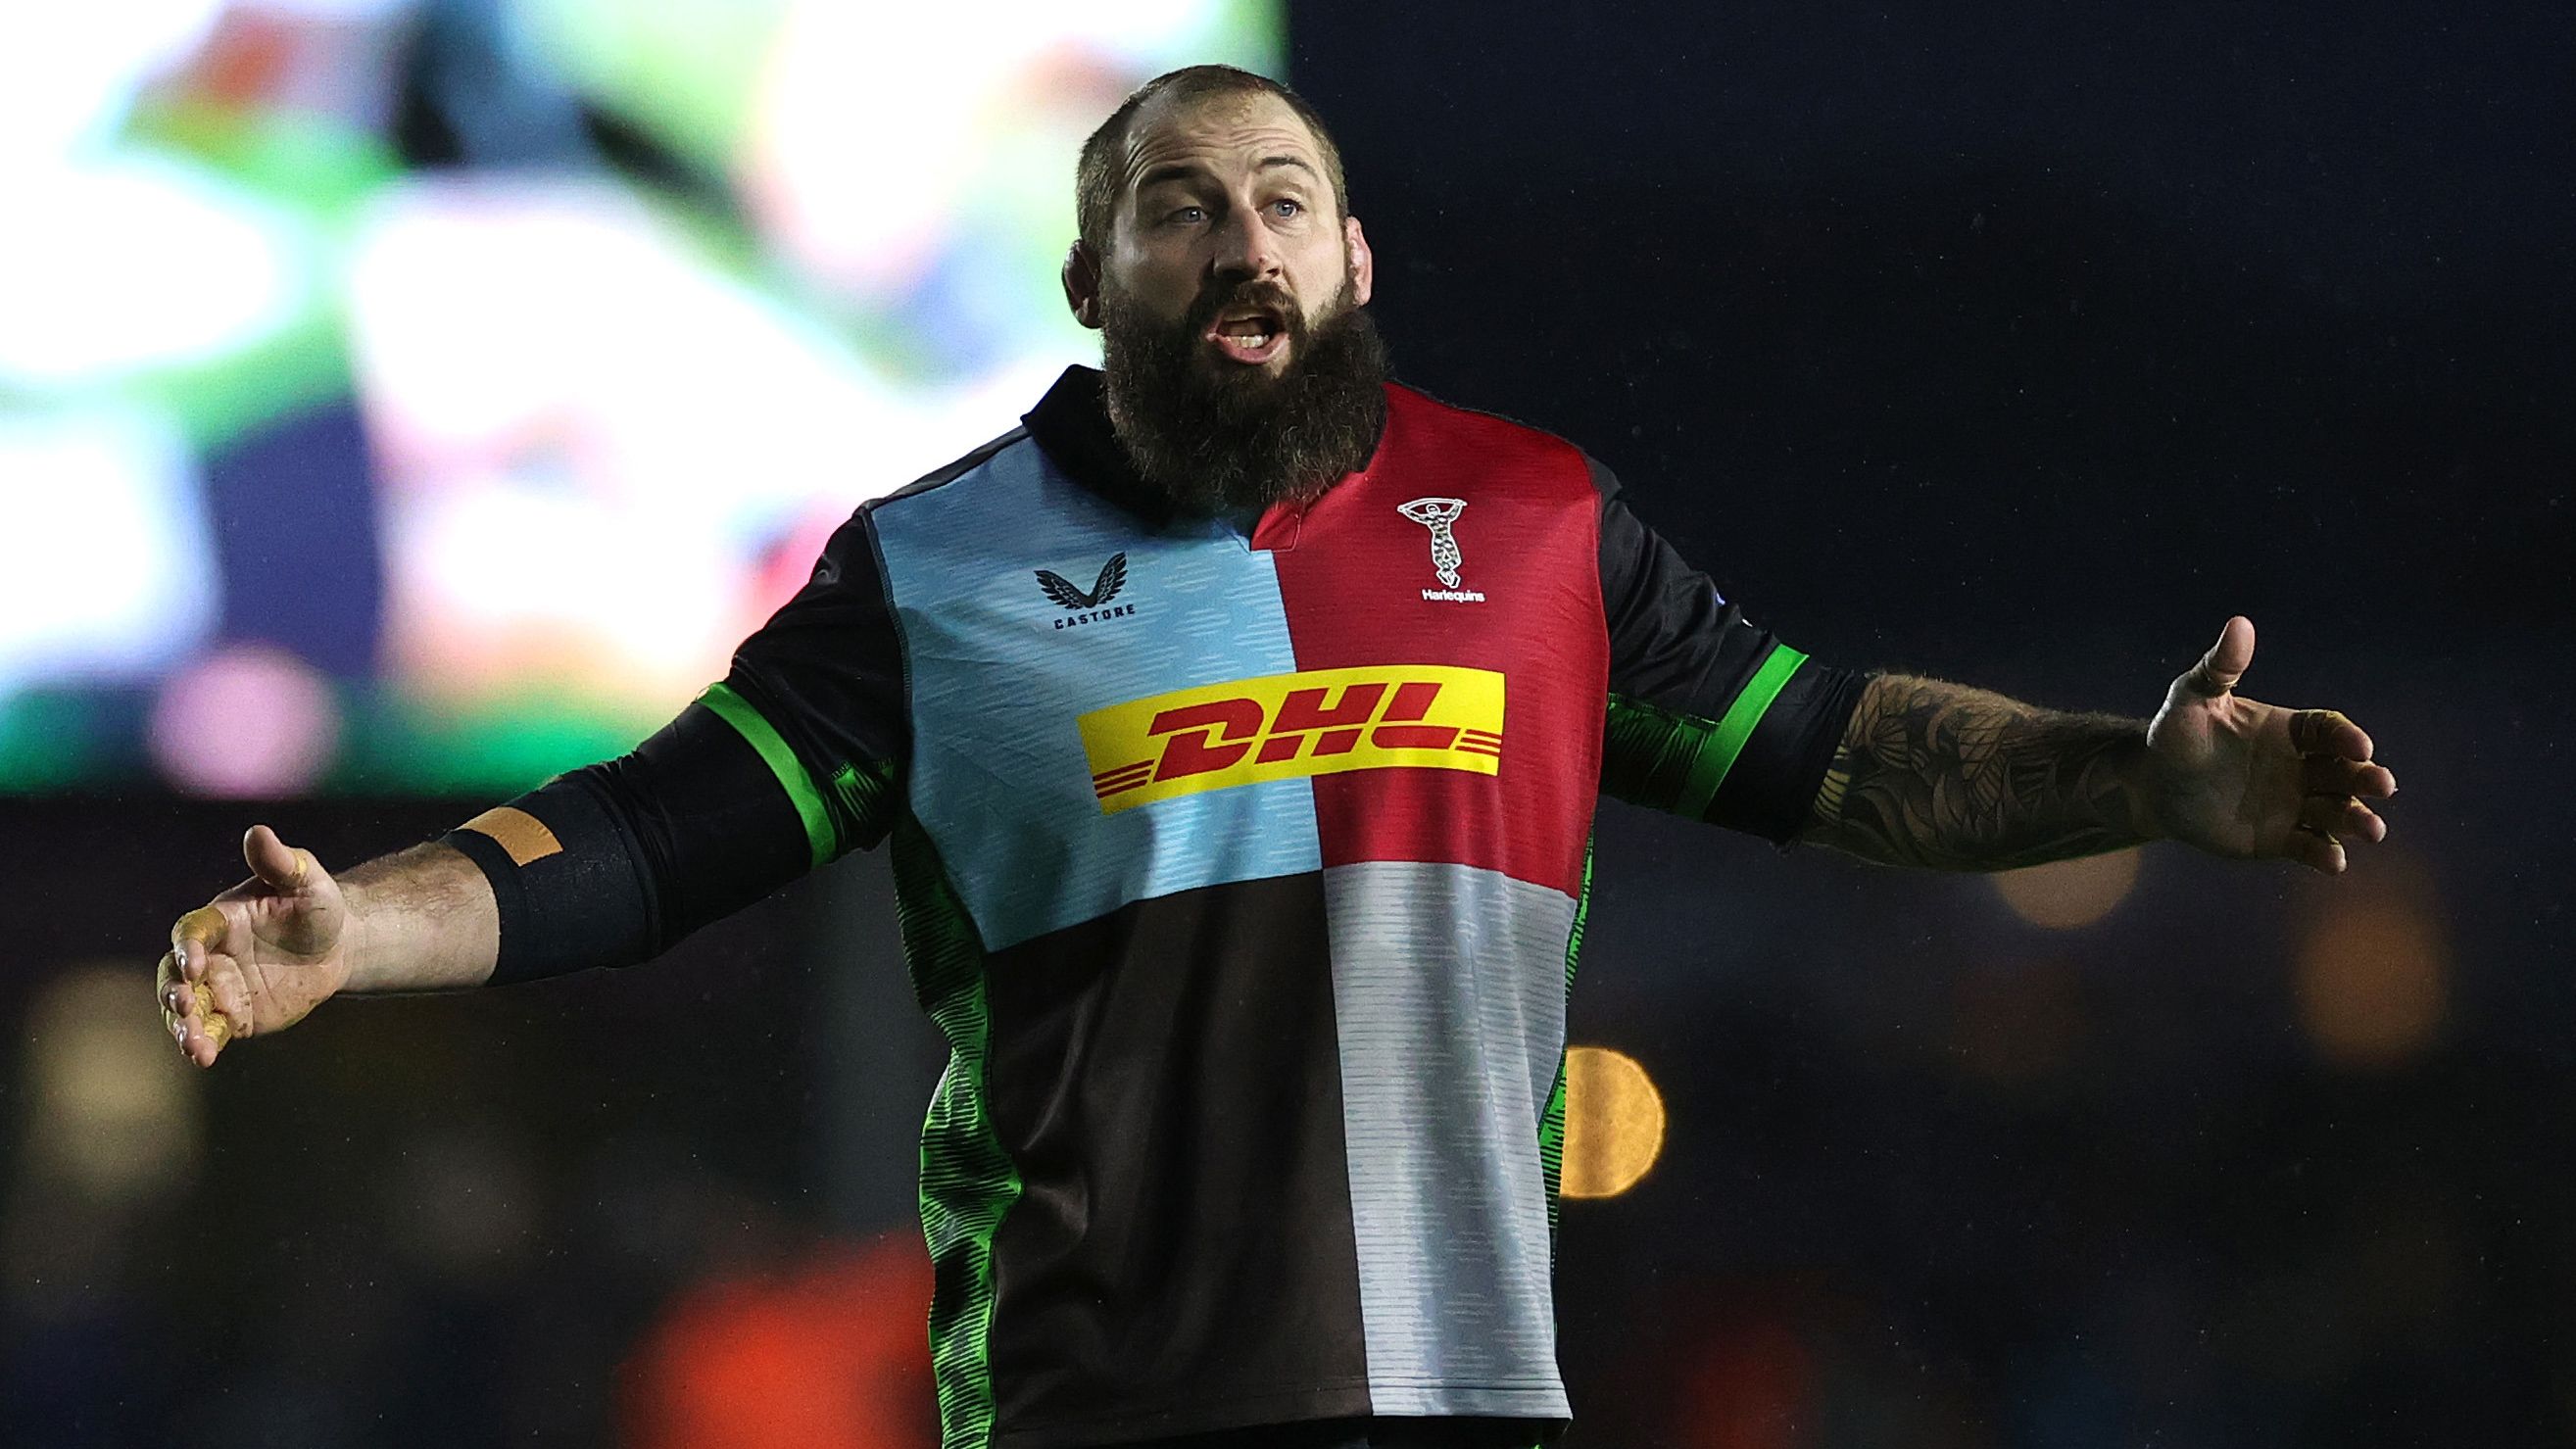 LONDON, ENGLAND - DECEMBER 27:  Joe Marler of Harlequins shouts instructions during the Gallagher Premiership Rugby match between Harlequins and Bristol Bears at Twickenham Stoop Stadium on December 27, 2022 in London, England. (Photo by David Rogers/Getty Images)